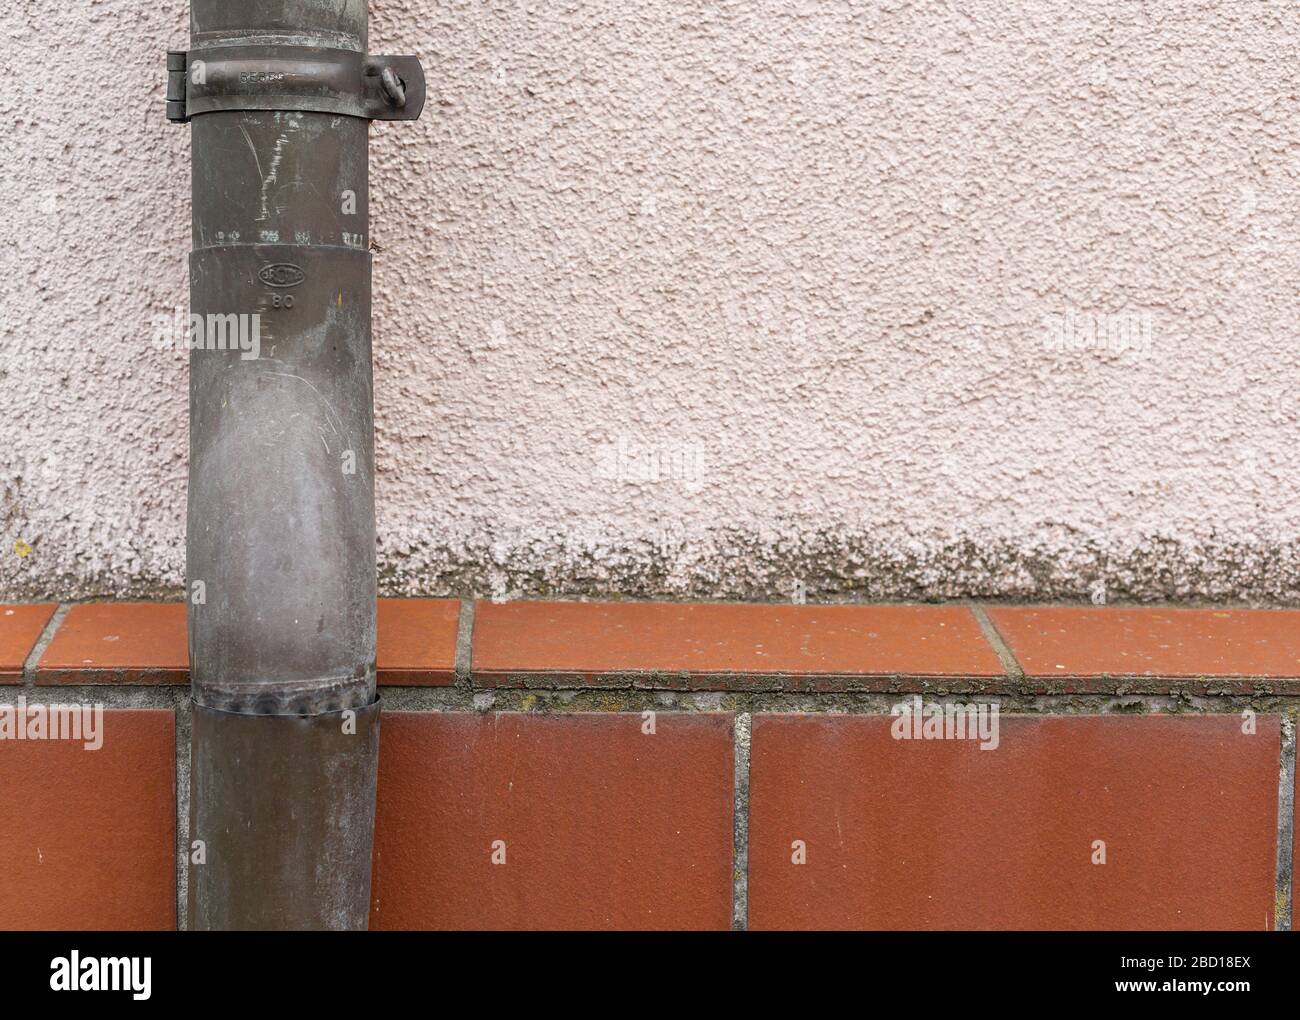 Rainwater drainage pipe. Sewage system. Pipes on the facade of the building. House after renovation. Metal constructions. Rough surfaces. Stock Photo